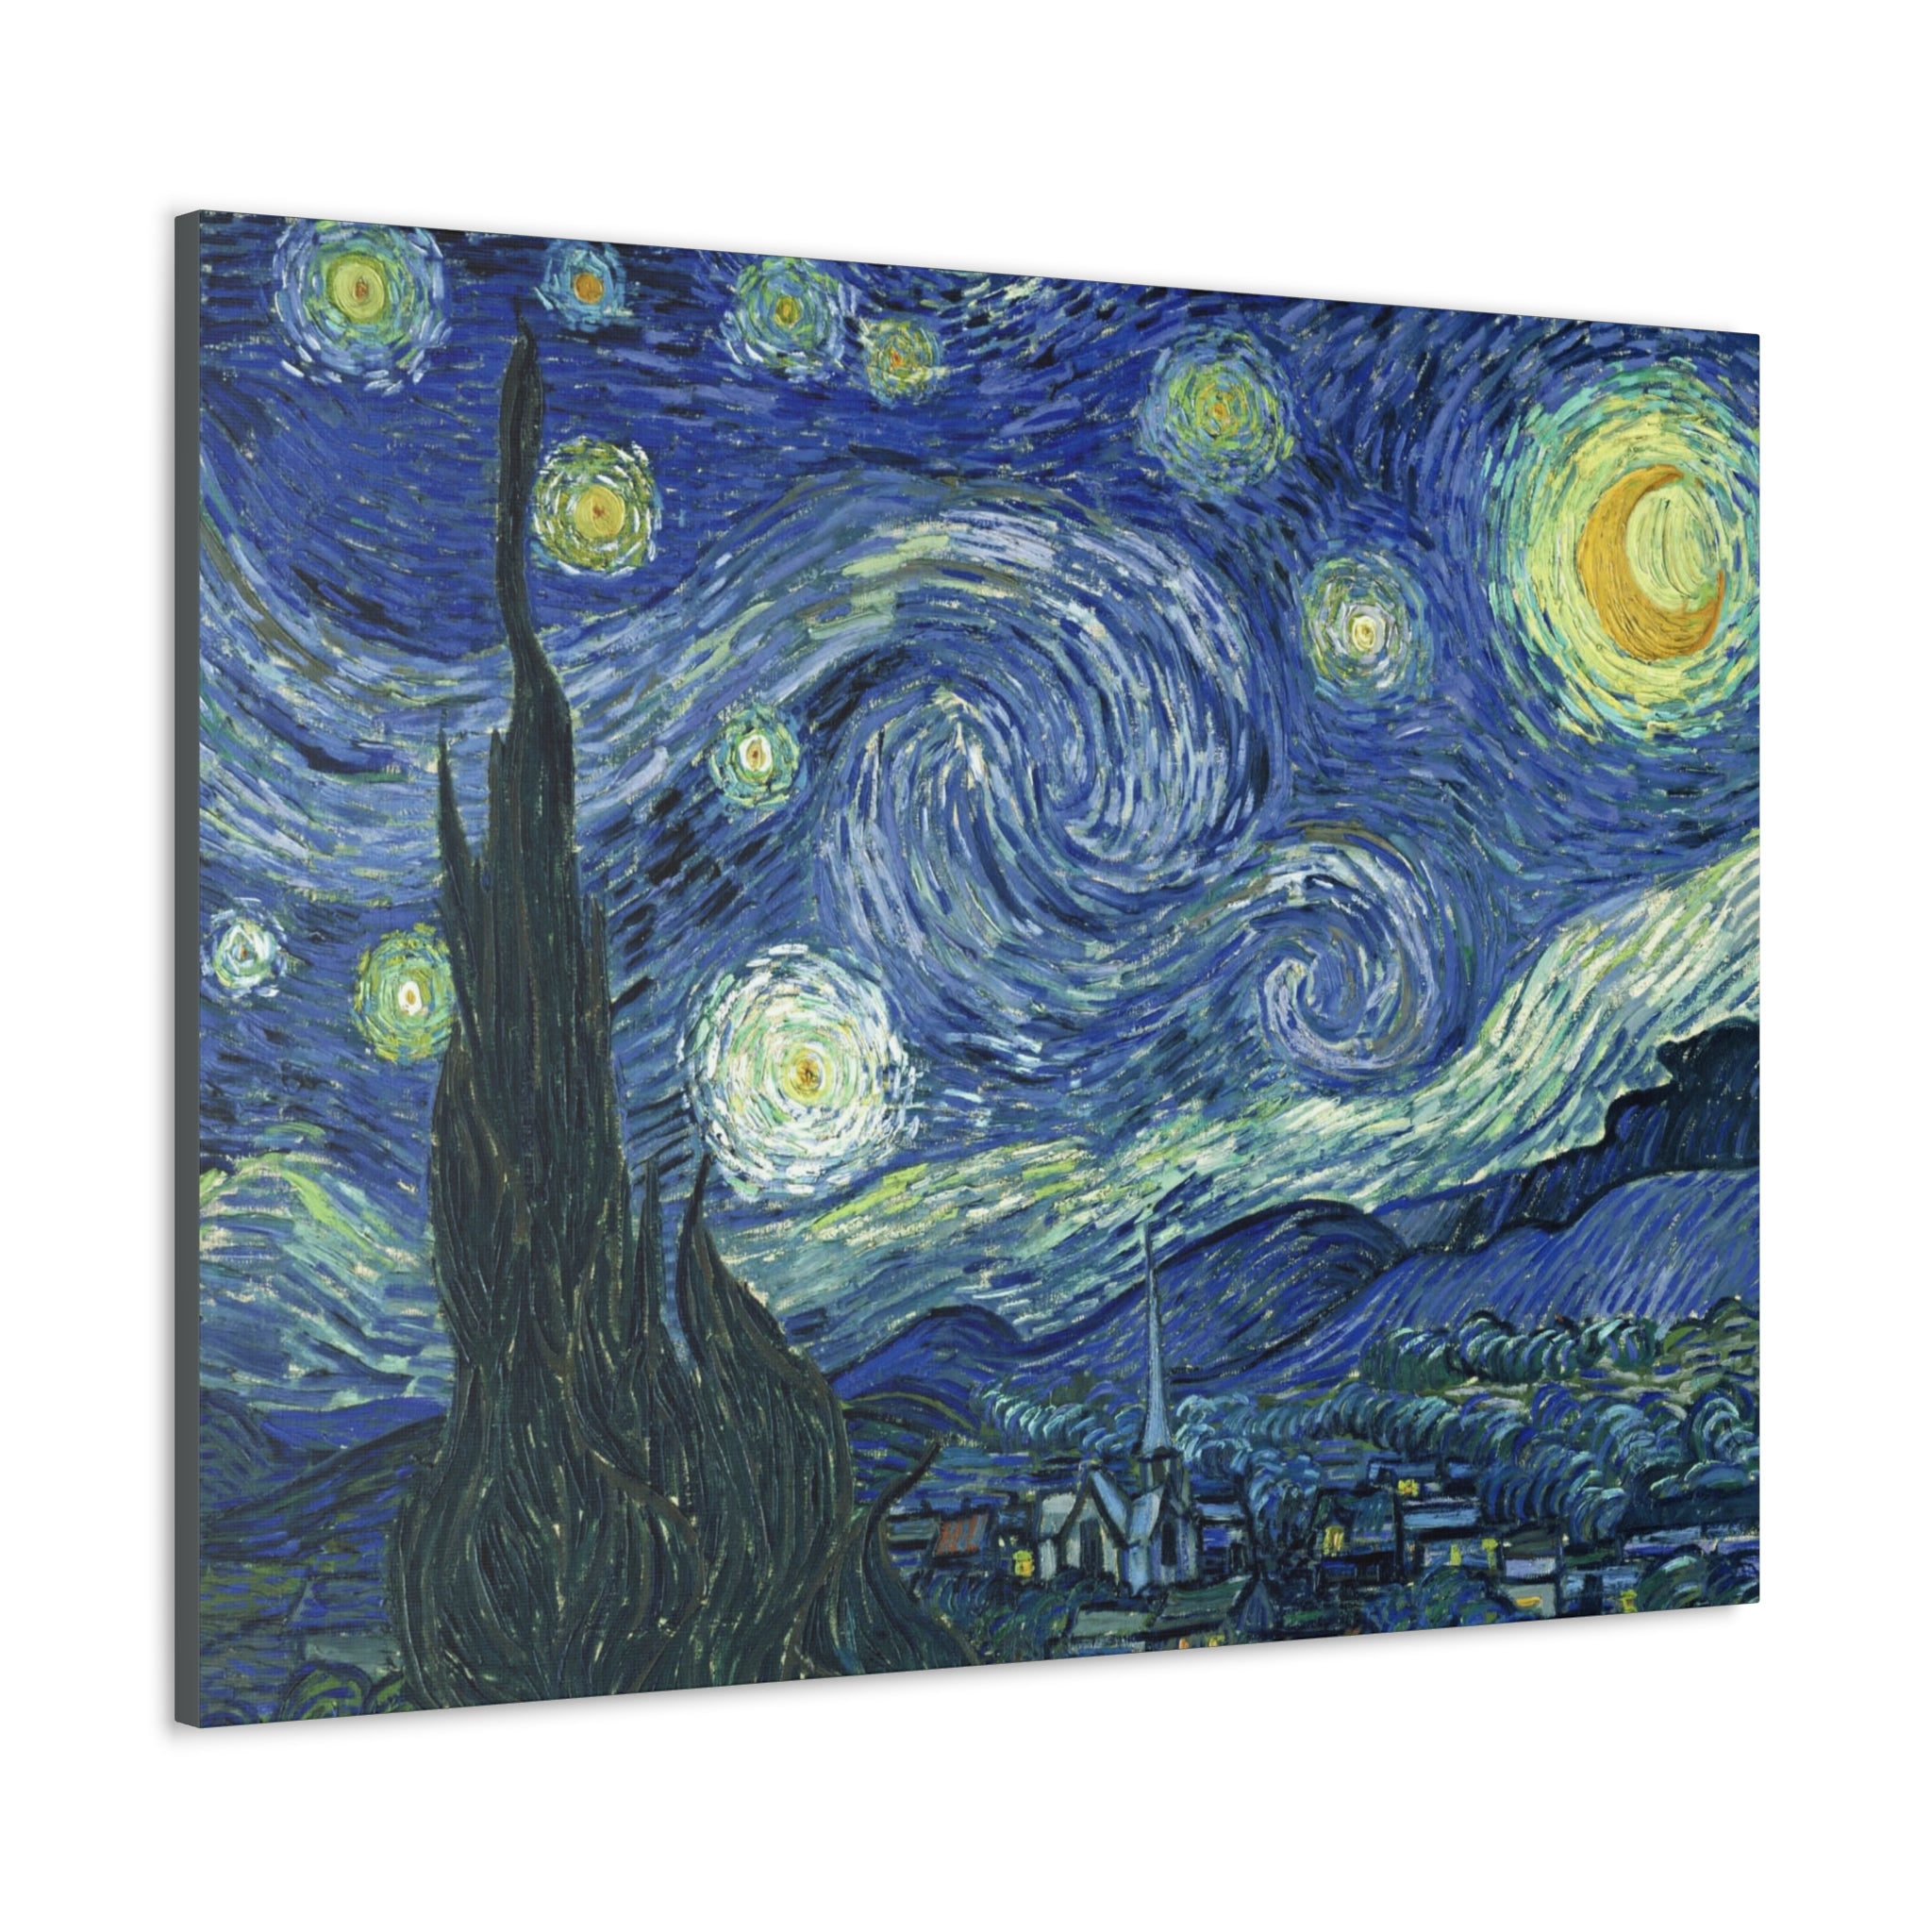 The Starry Night - Vincent Van Gogh - Canvas Gallery Wraps